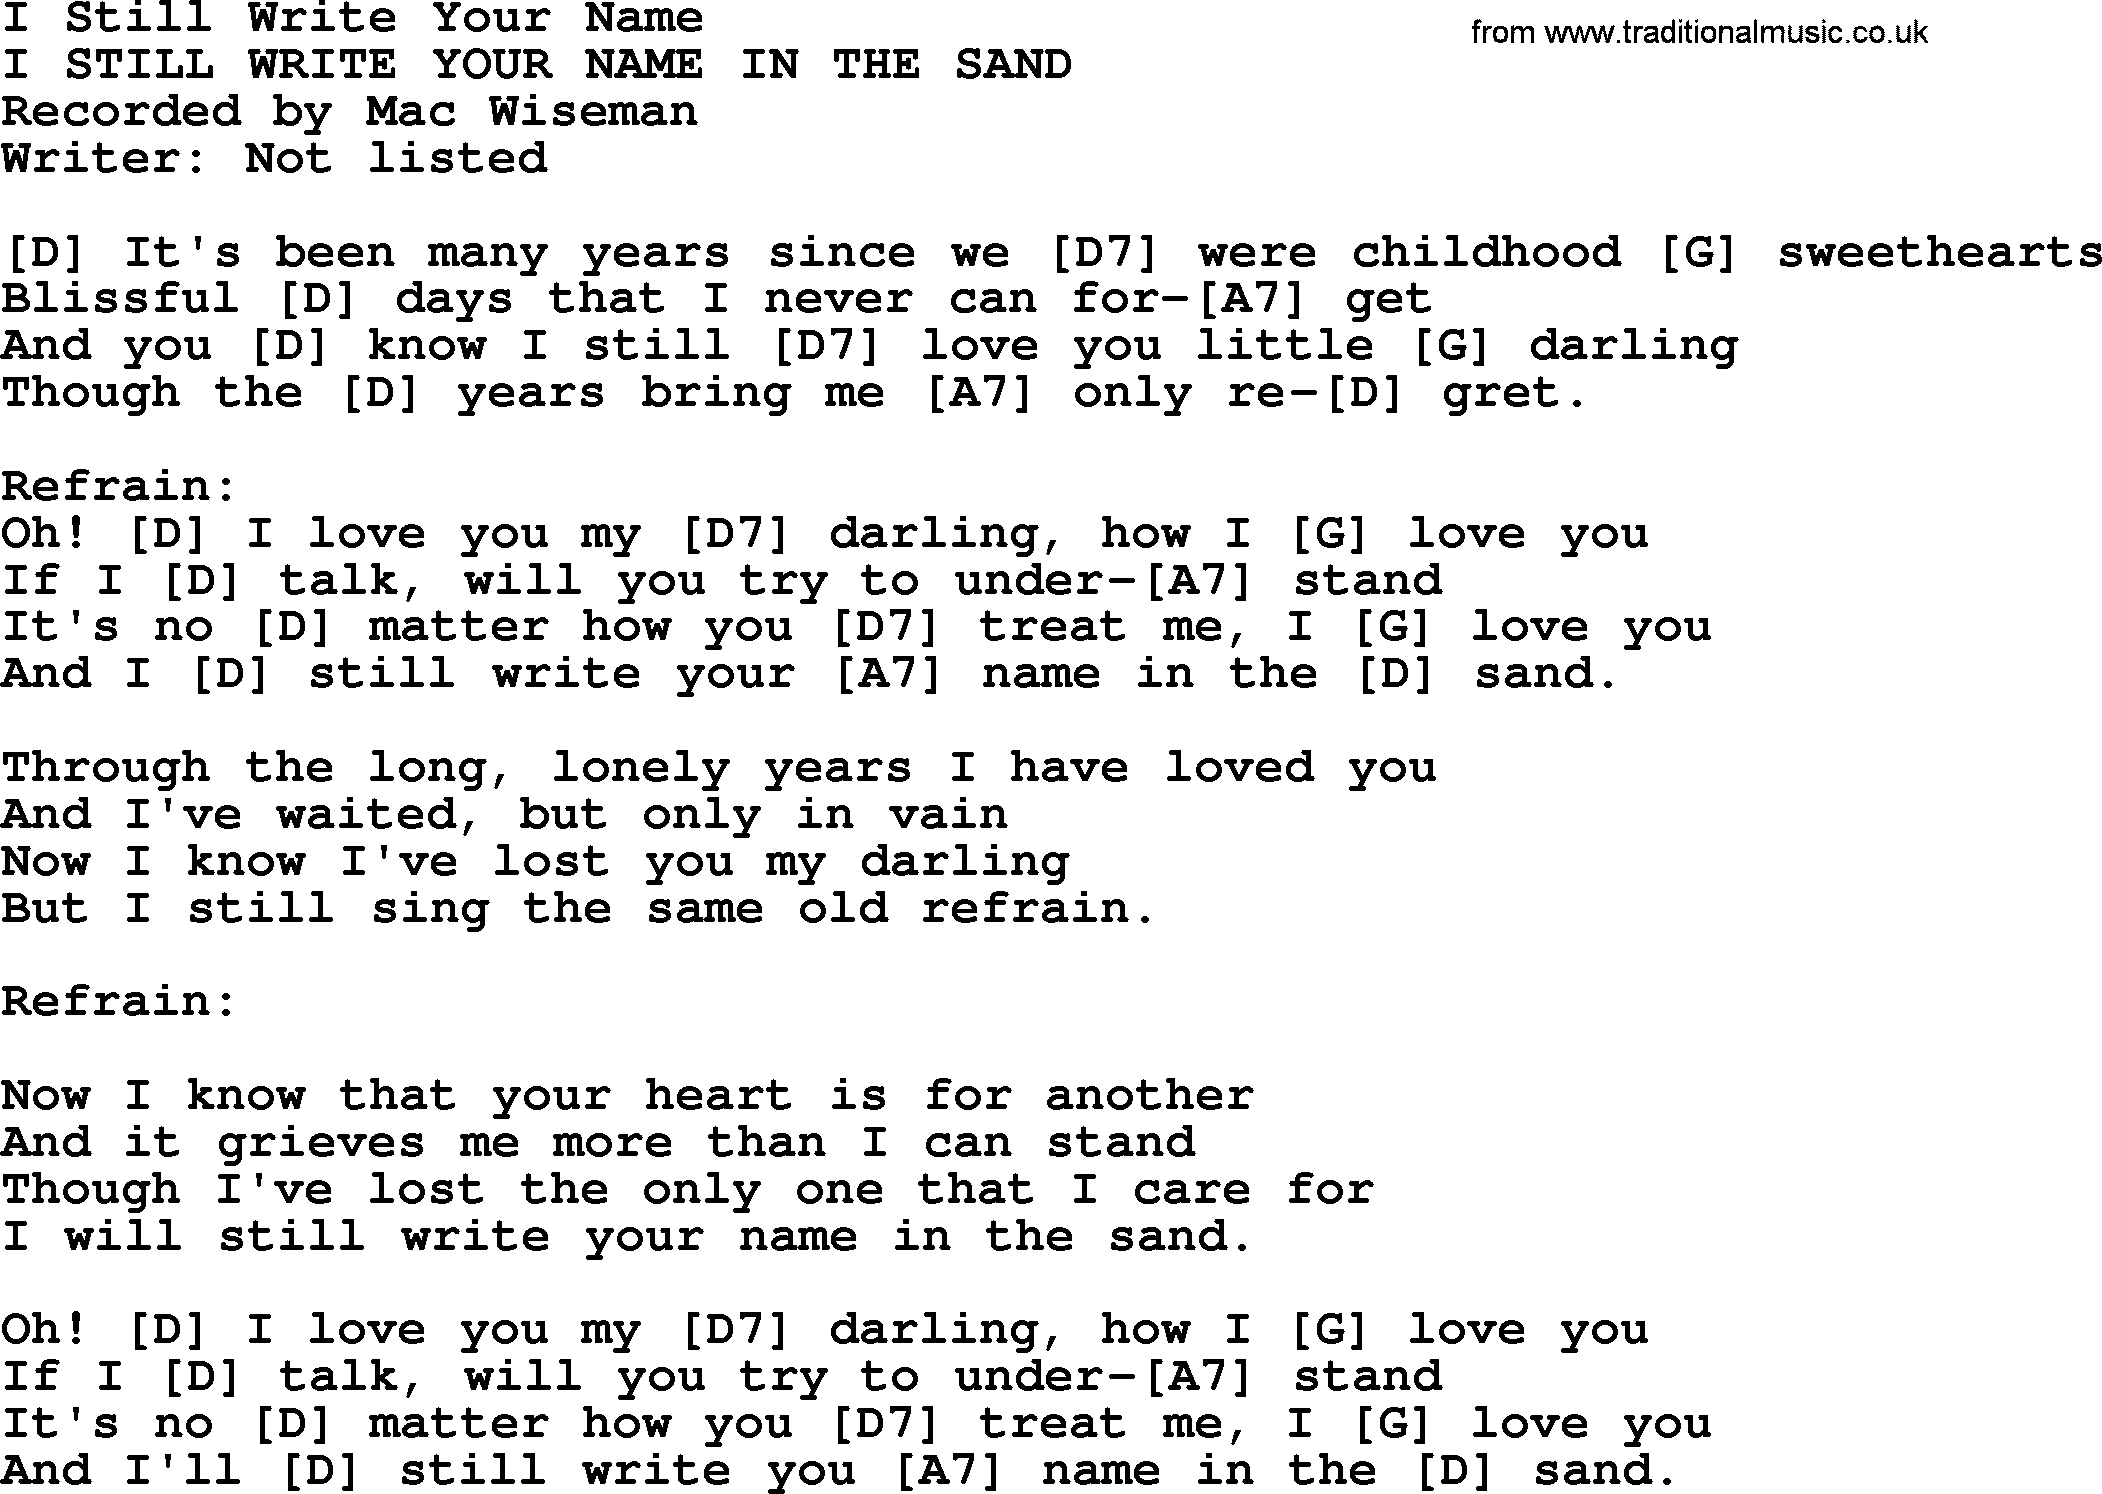 Bluegrass song: I Still Write Your Name, lyrics and chords